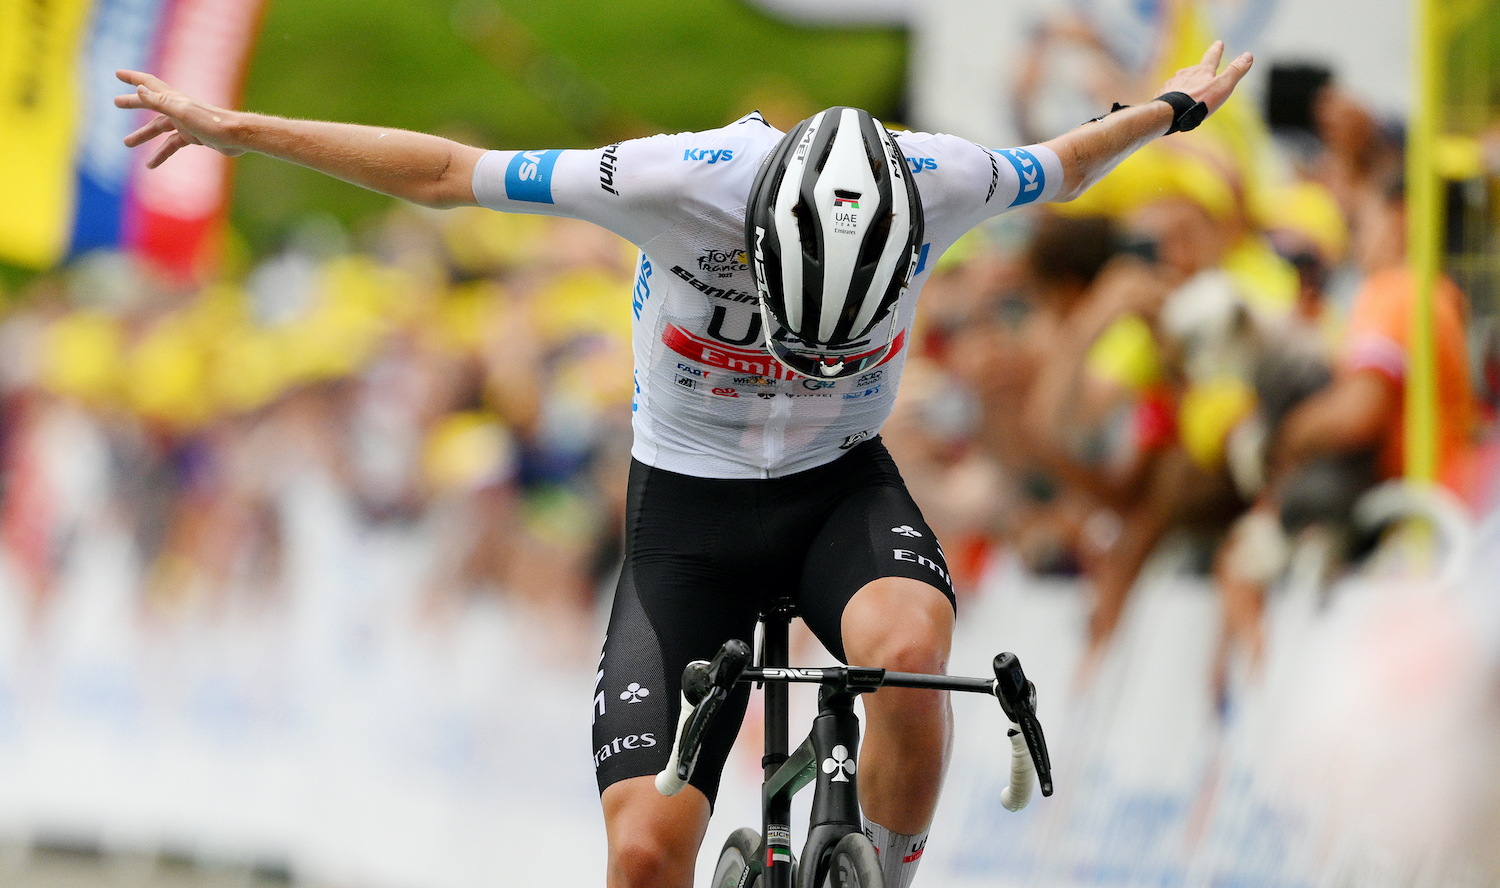 CAUTERETS-CAMBASQUE, FRANCE - JULY 06: Tadej Pogacar of Slovenia and UAE Team Emirates - White Best Young Rider Jersey celebrates at finish line as stage winner during the stage six of the 110th Tour de France 2023 a 144.9km stage from Tarbes to Cauterets-Cambasque 1355m / #UCIWT / on July 06, 2023 in Cauterets-Cambasque, France. (Photo by David Ramos/Getty Images)